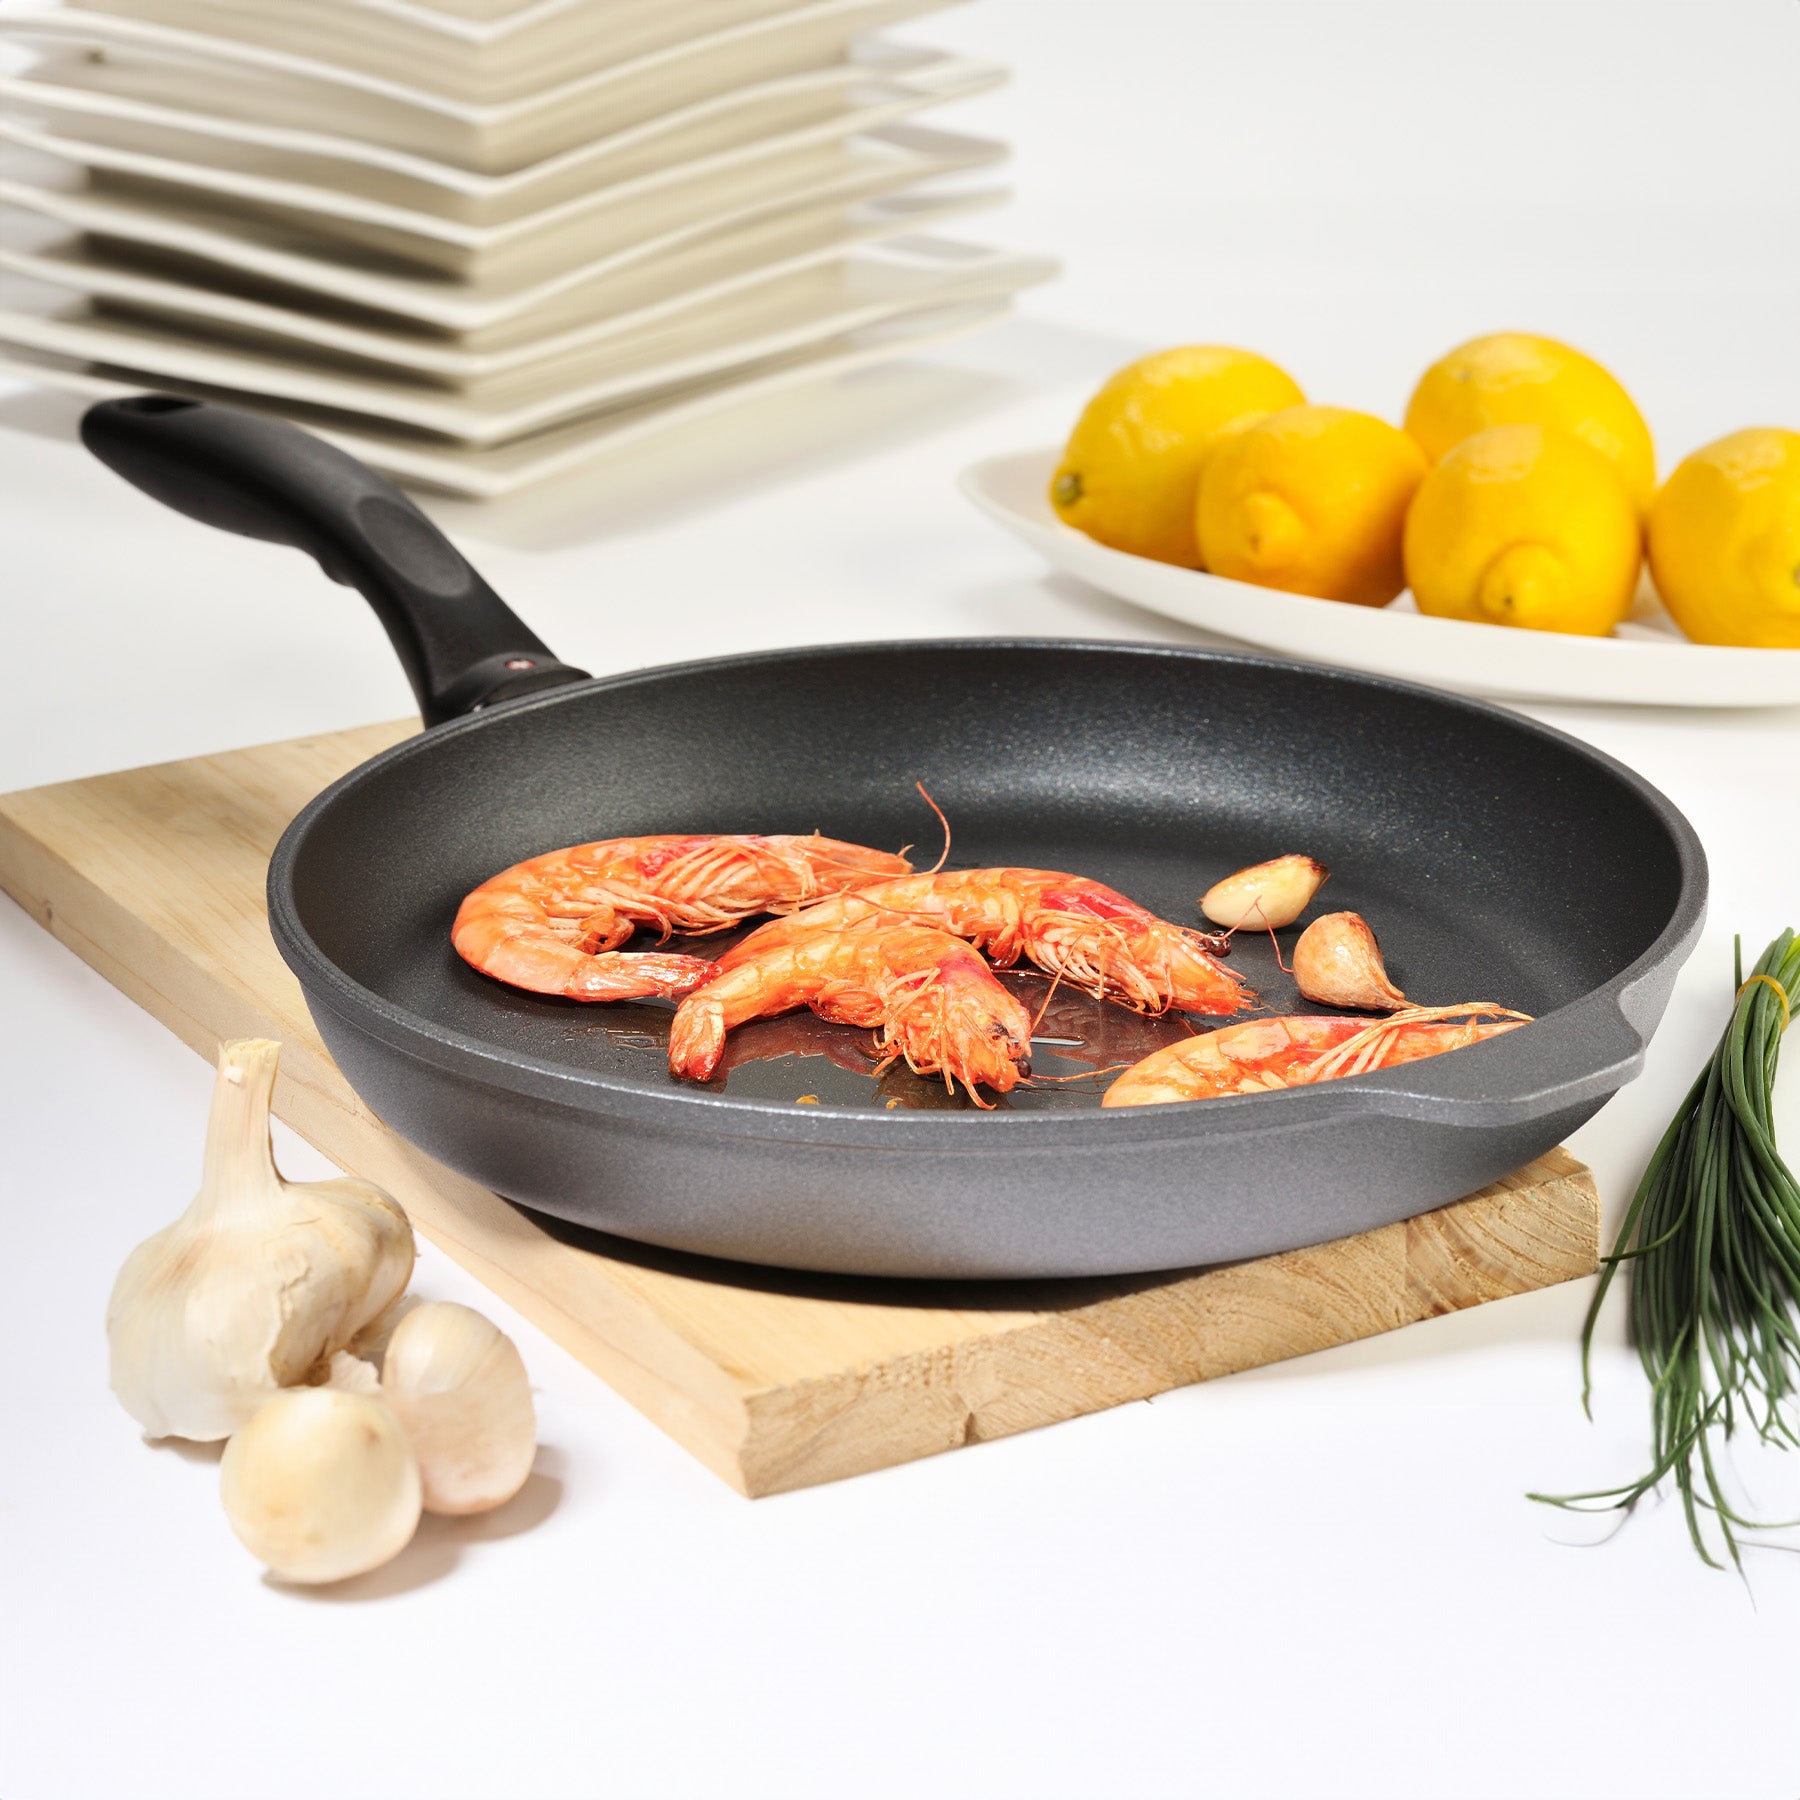 HD Nonstick Fry Pan - Induction in use on cutting board